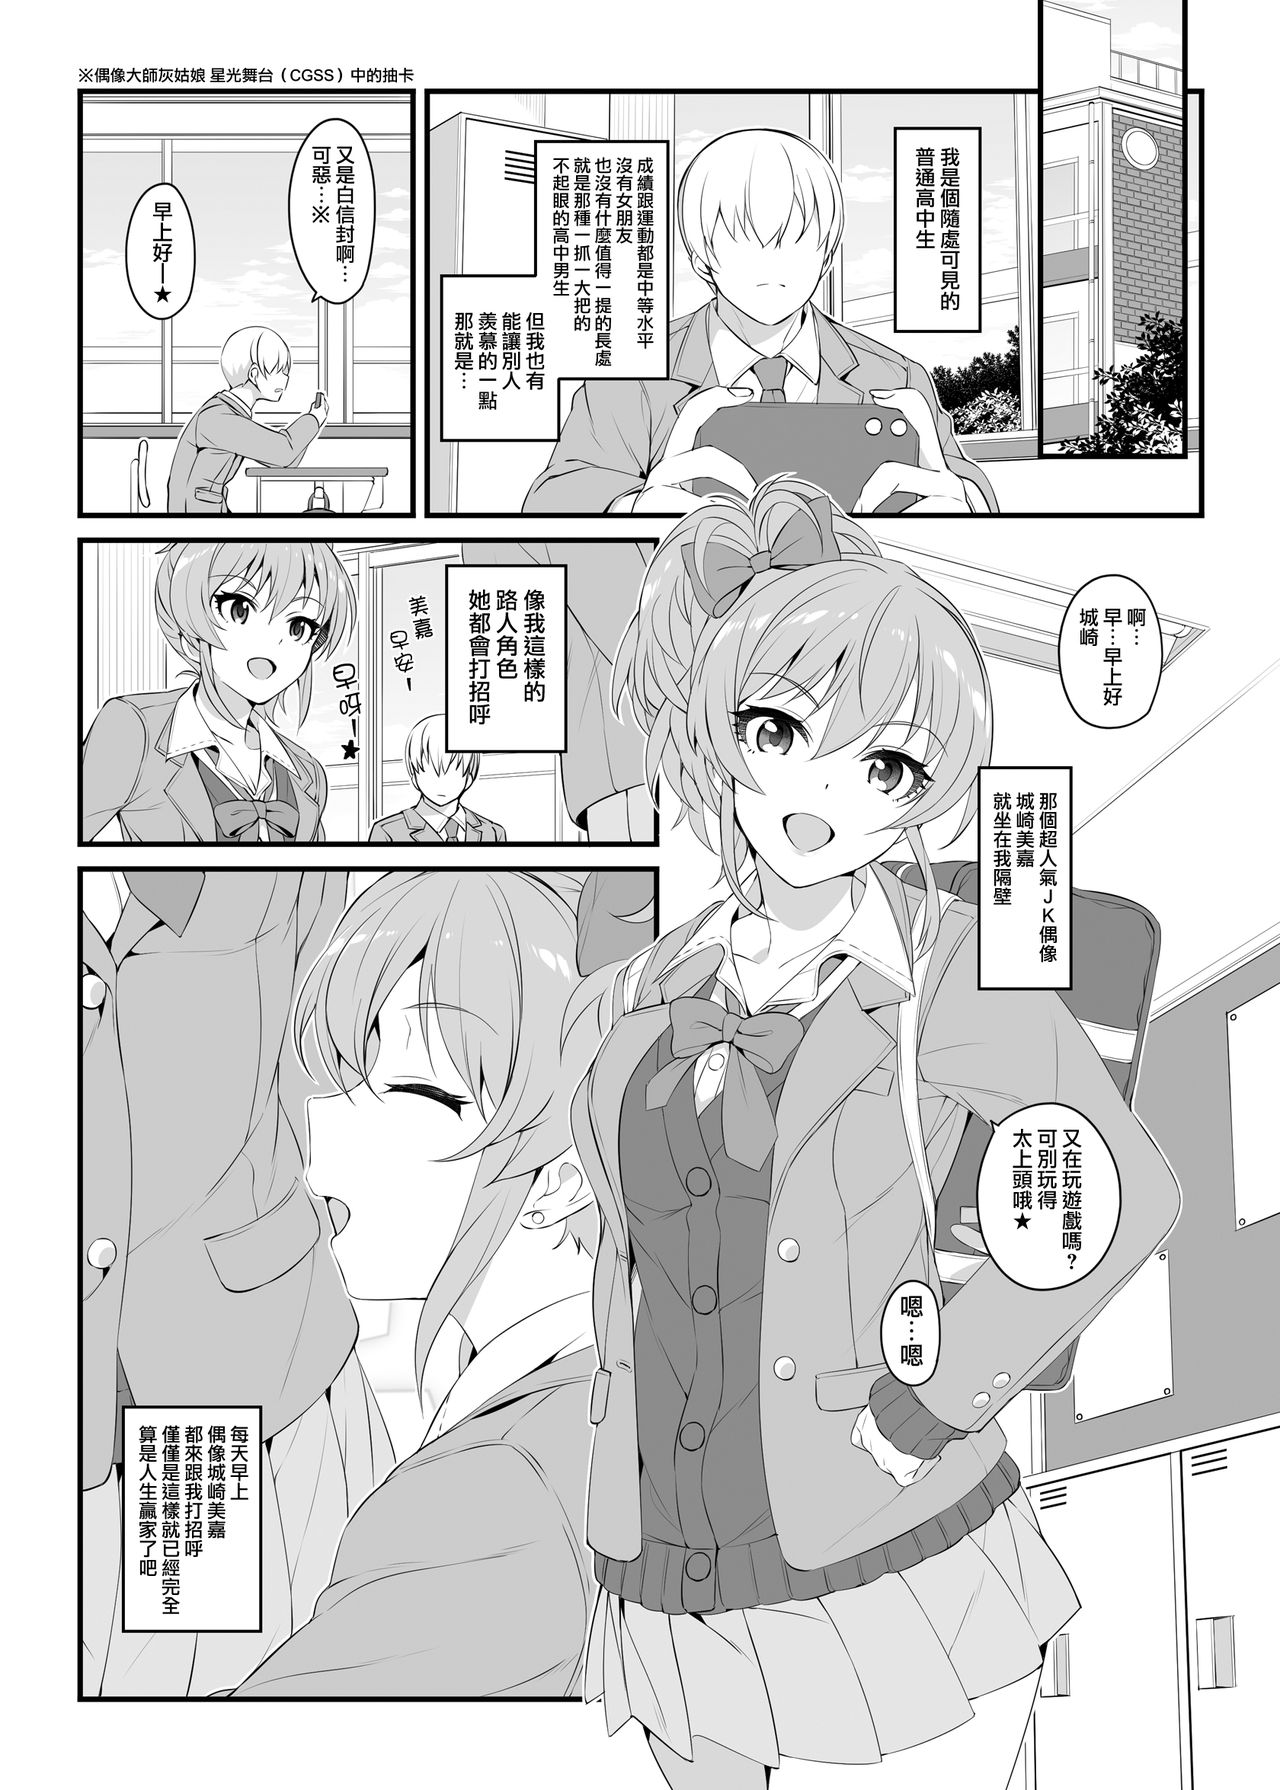 [Jekyll and Hyde (MAKOTO)] The first secret meeting of the Charismatic Queens. (THE IDOLM@STER CINDERELLA GIRLS) [Chinese] [無邪気漢化組] [Digital] [Jekyll and Hyde (MAKOTO)] The first secret meeting of the Charismatic Queens. (アイドルマスター シンデレラガールズ) [中国翻訳] [DL版]